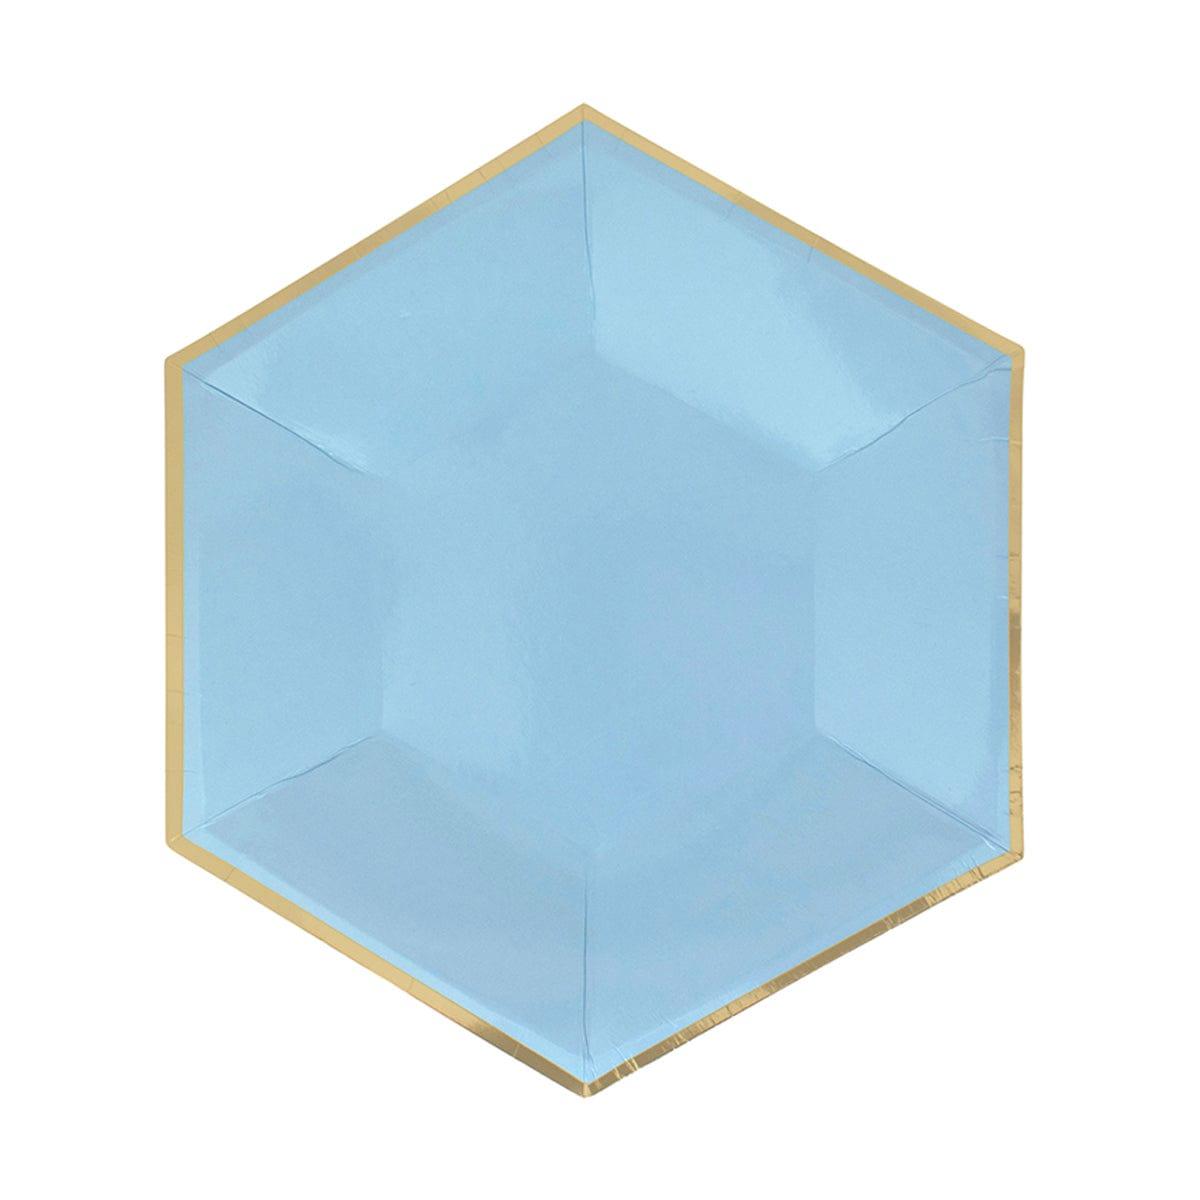 YIWU SANDY PAPER PRODUCTS CO., LTD Everyday Entertaining Hexagon Light Blue Plates, 9 Inches, 8 Count